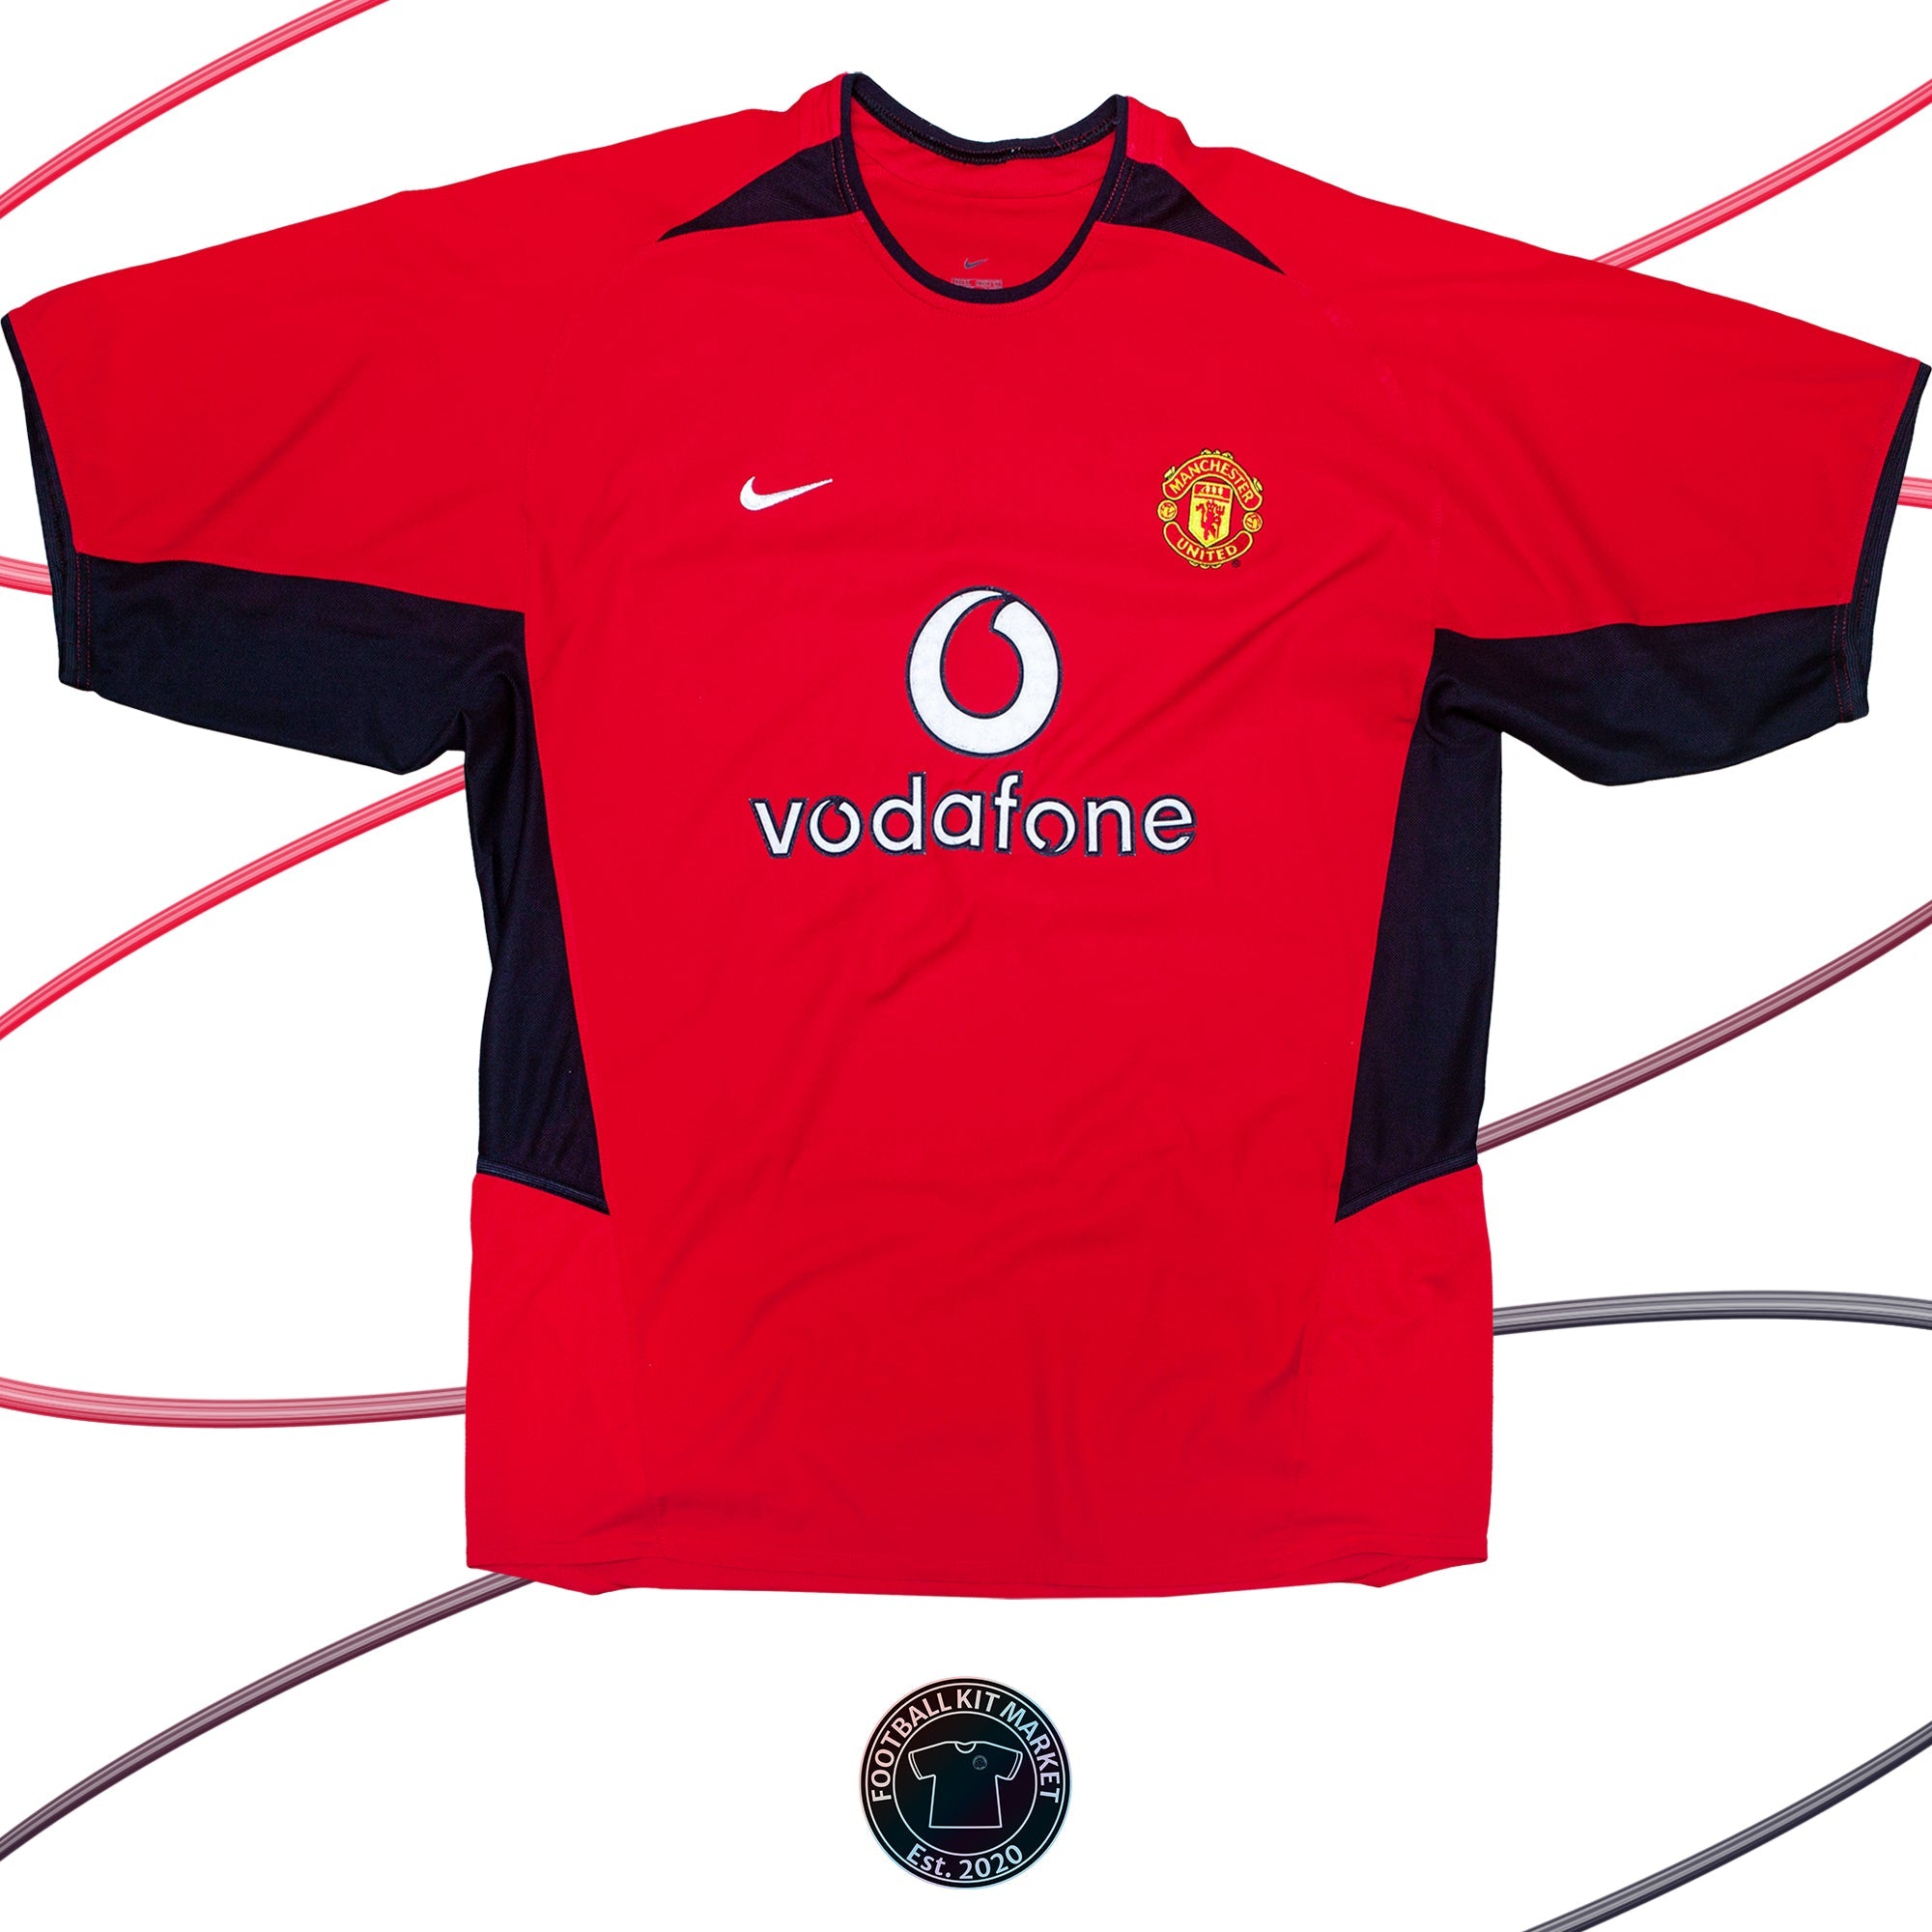 Genuine MANCHESTER UNITED Home Shirt (2002-2004) - NIKE (XL) - Product Image from Football Kit Market